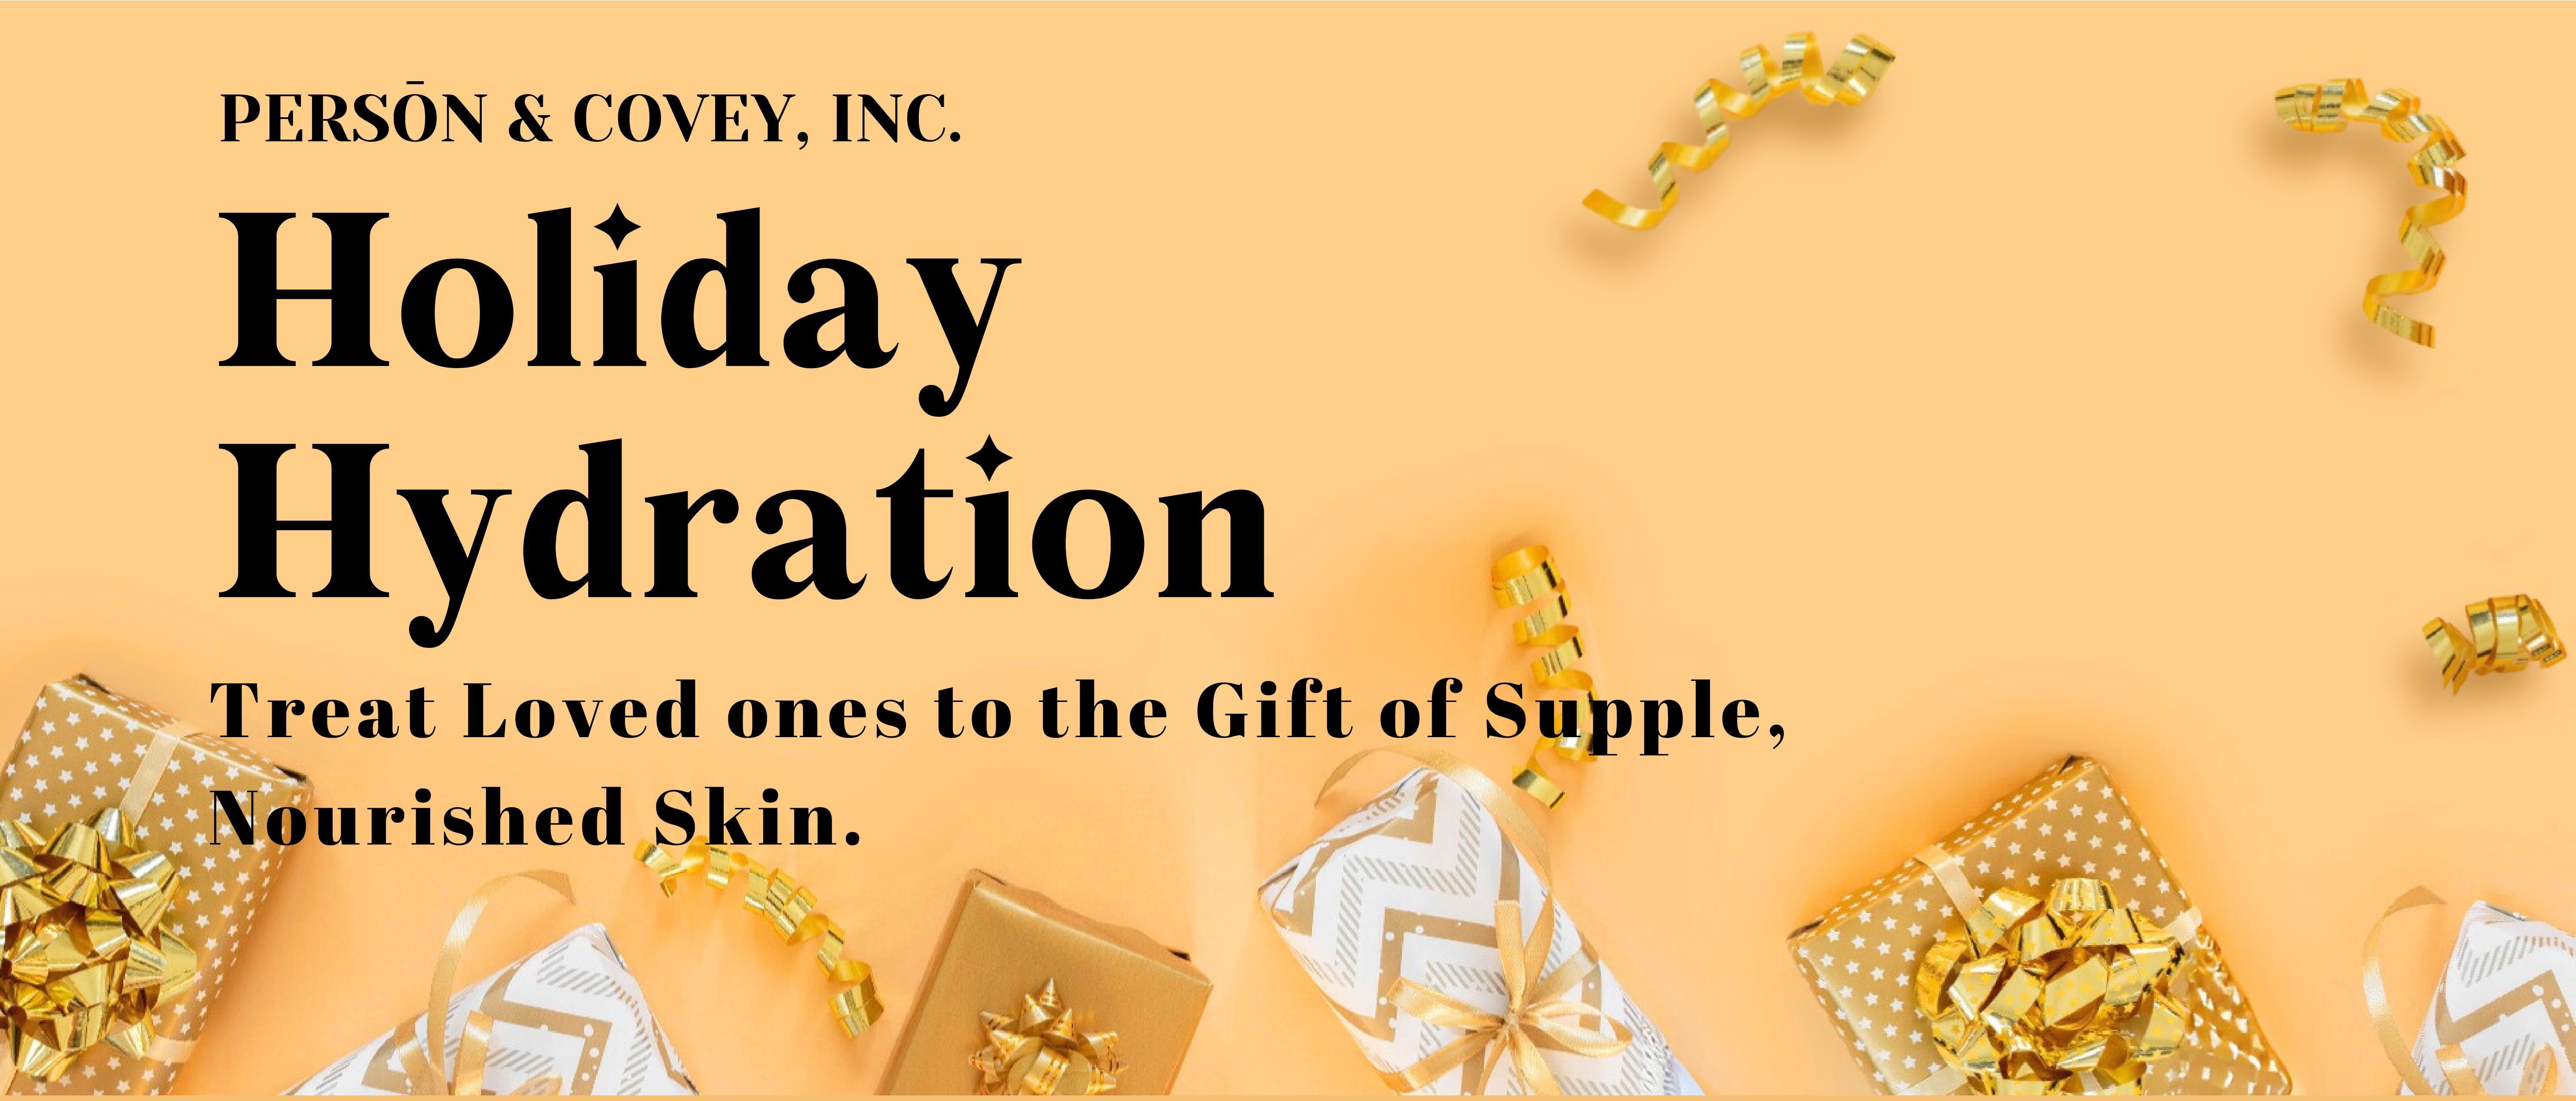 Holiday Hydration- treat loved ones to the gift of supple, nourished skin